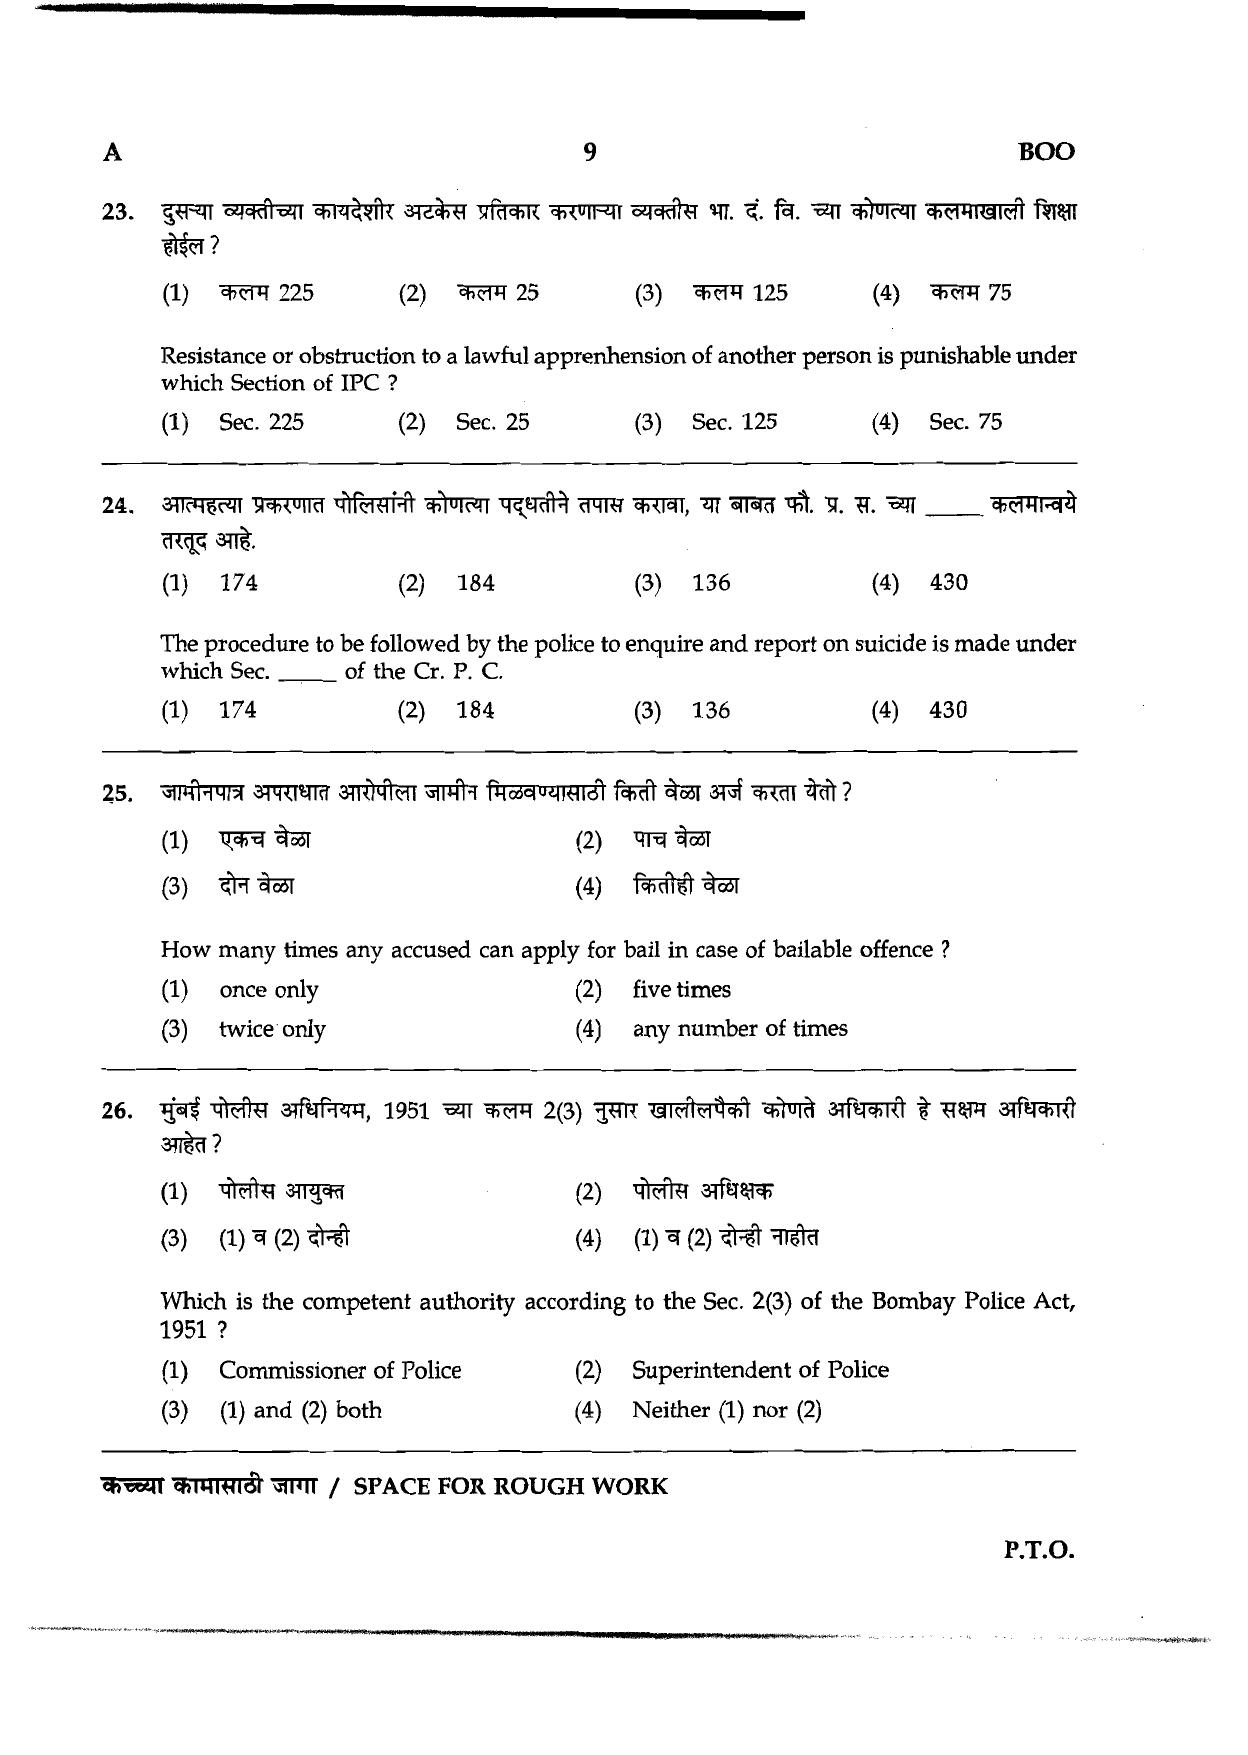 Assam Police LDA, UDA & Other Posts General Knowledge Sample papers - Page 9